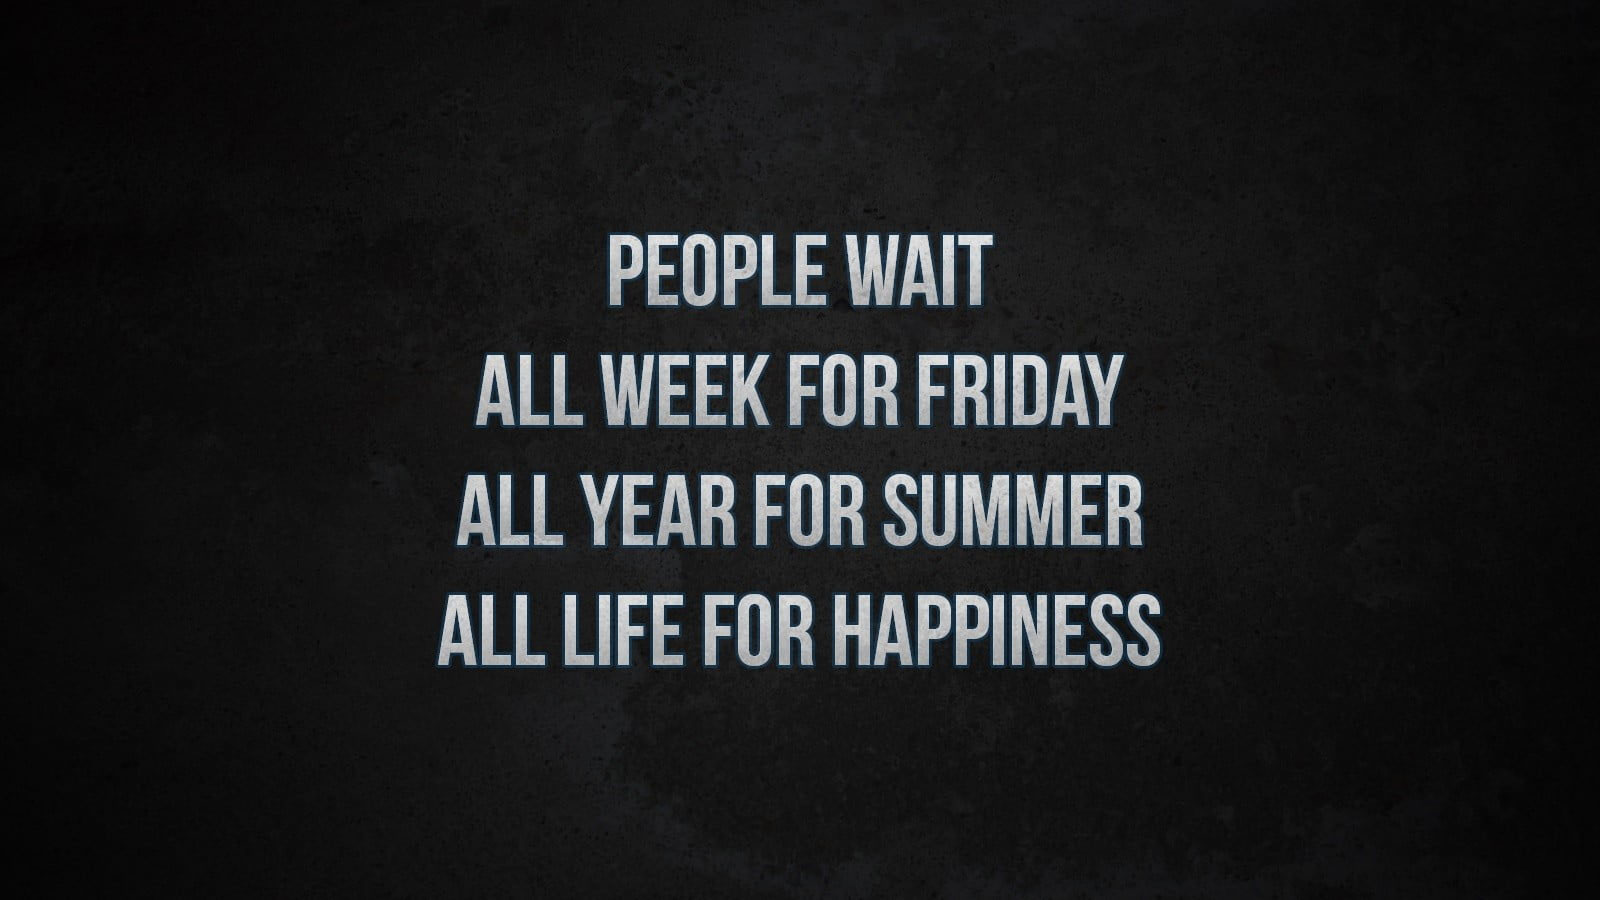 People wait all week for friday all year for summer all life for happiness wallpaper